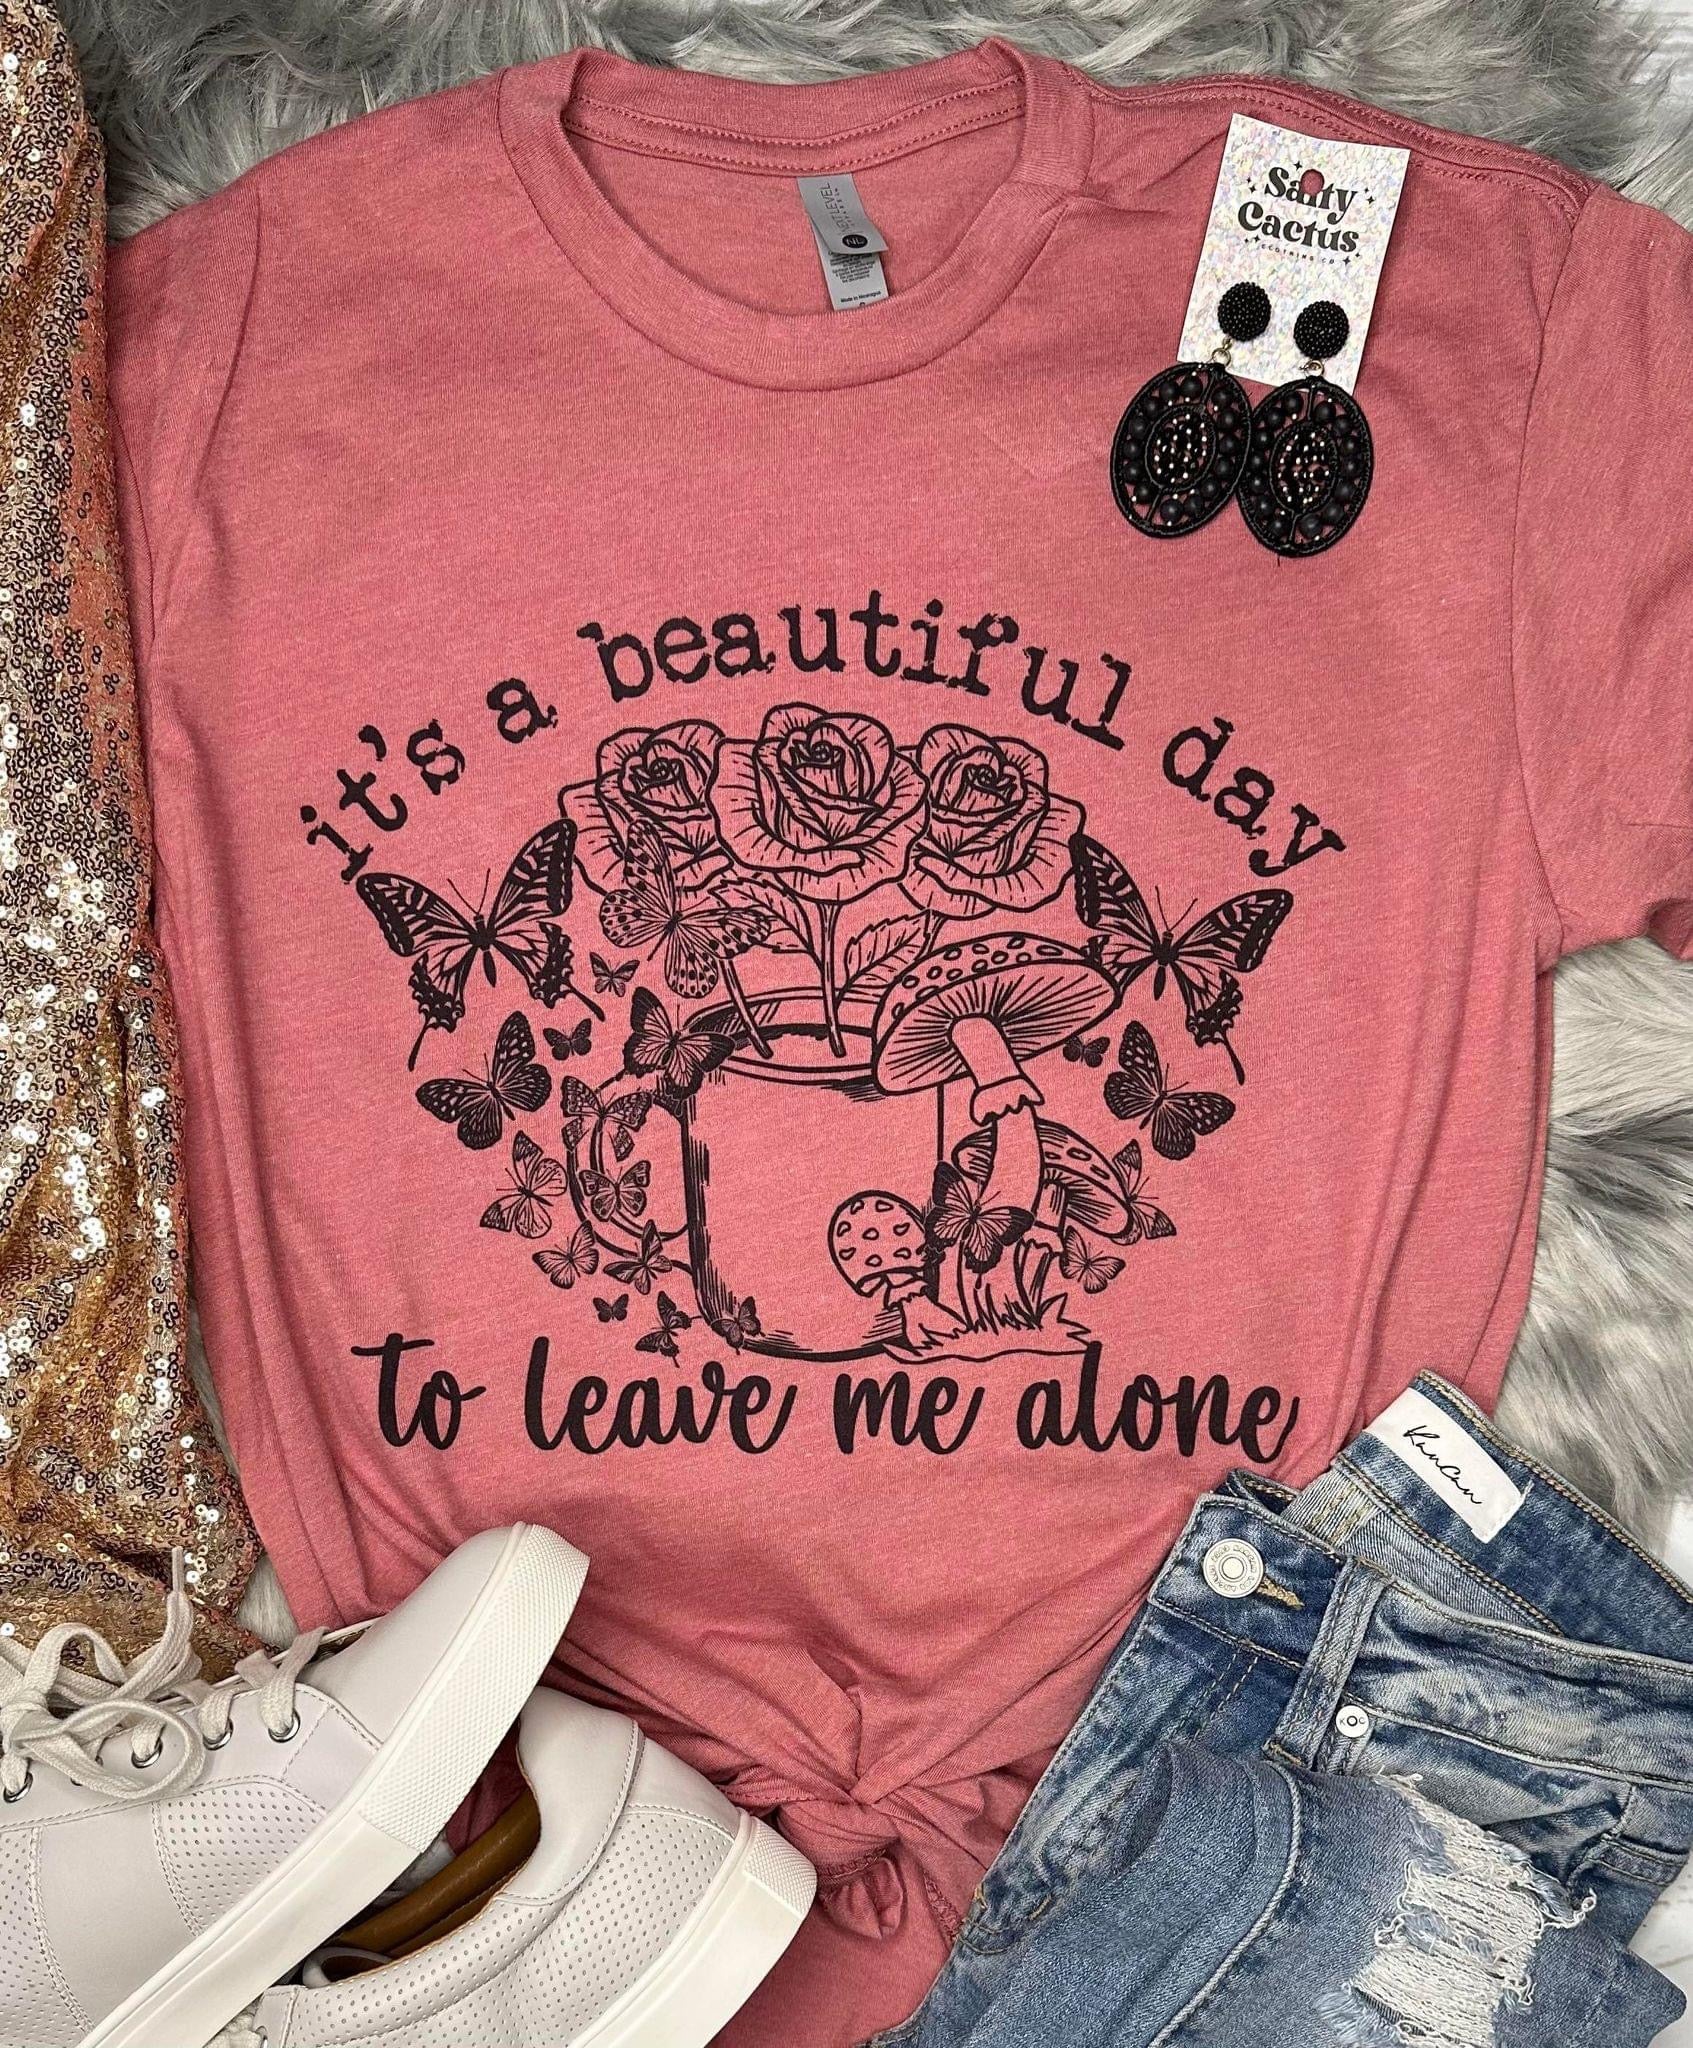 PREORDER ITS A BEAUTIFUL DAY TO LEAVE ME ALONE T-SHIRT